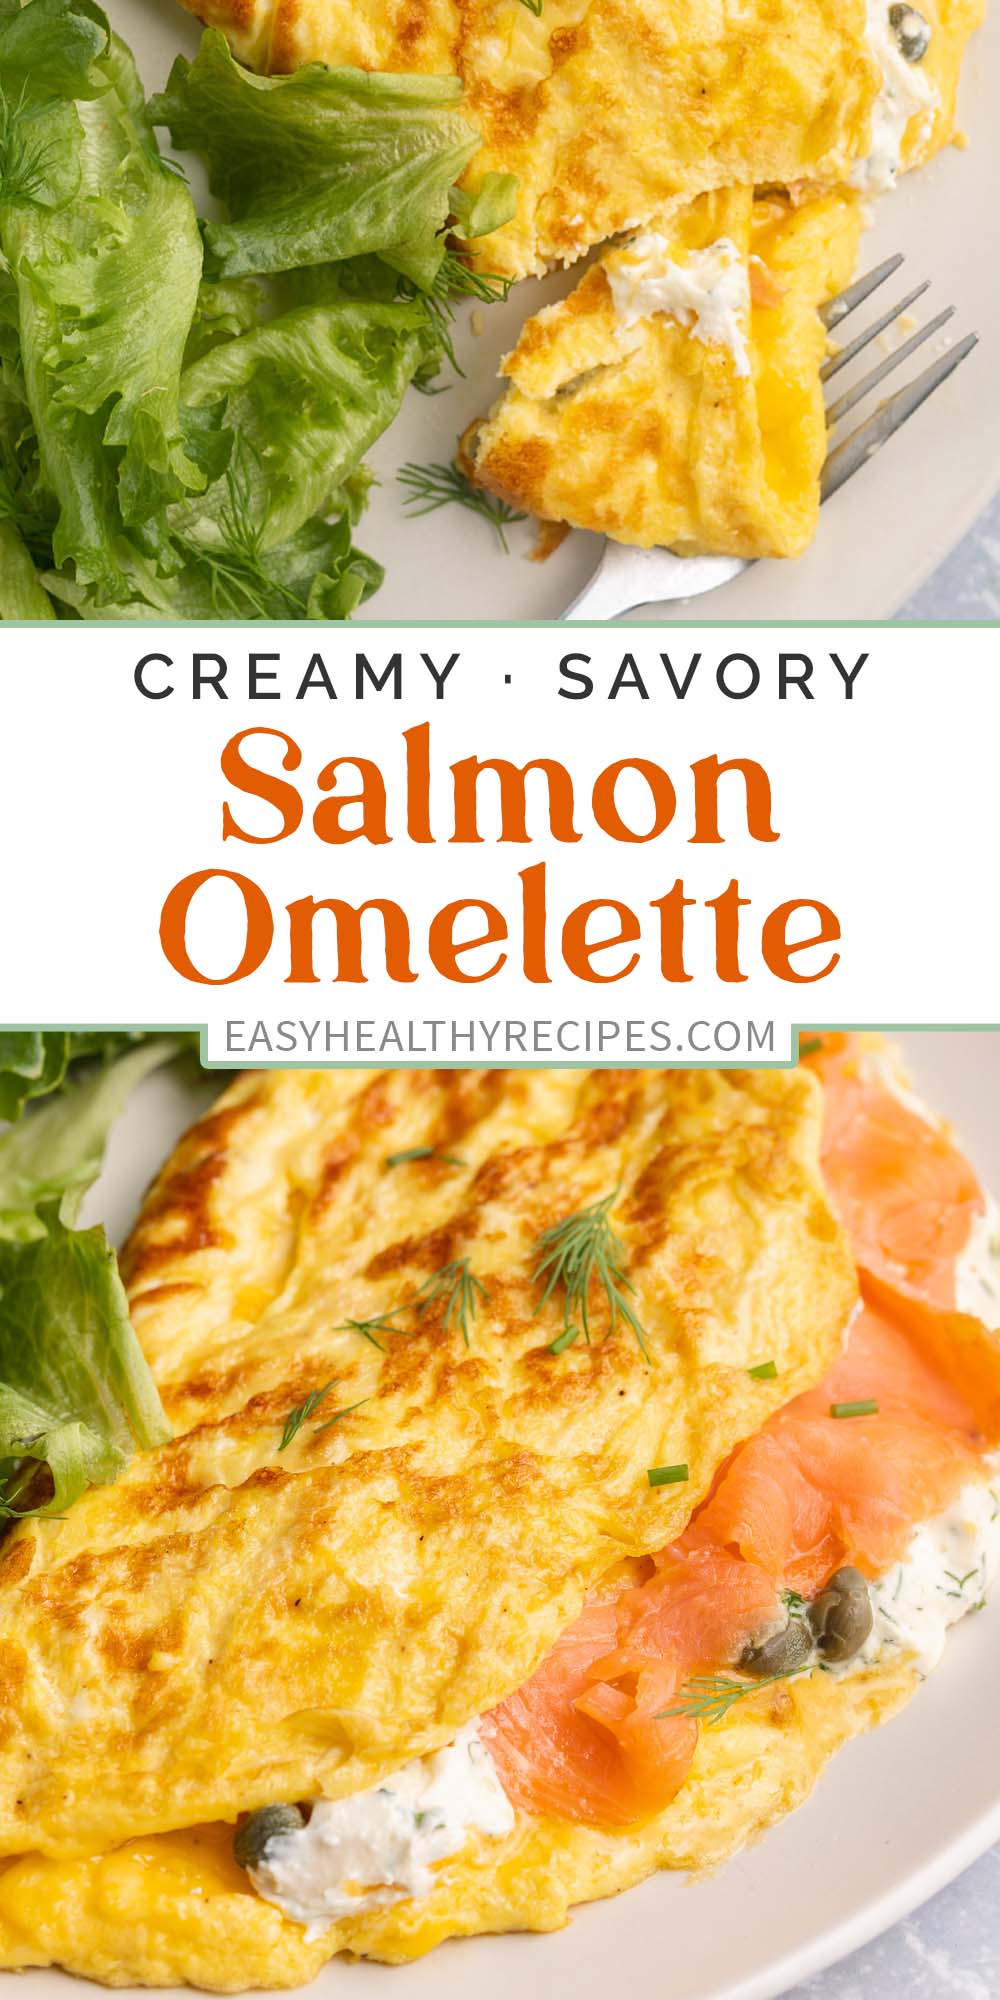 Pin graphic for salmon omelette.